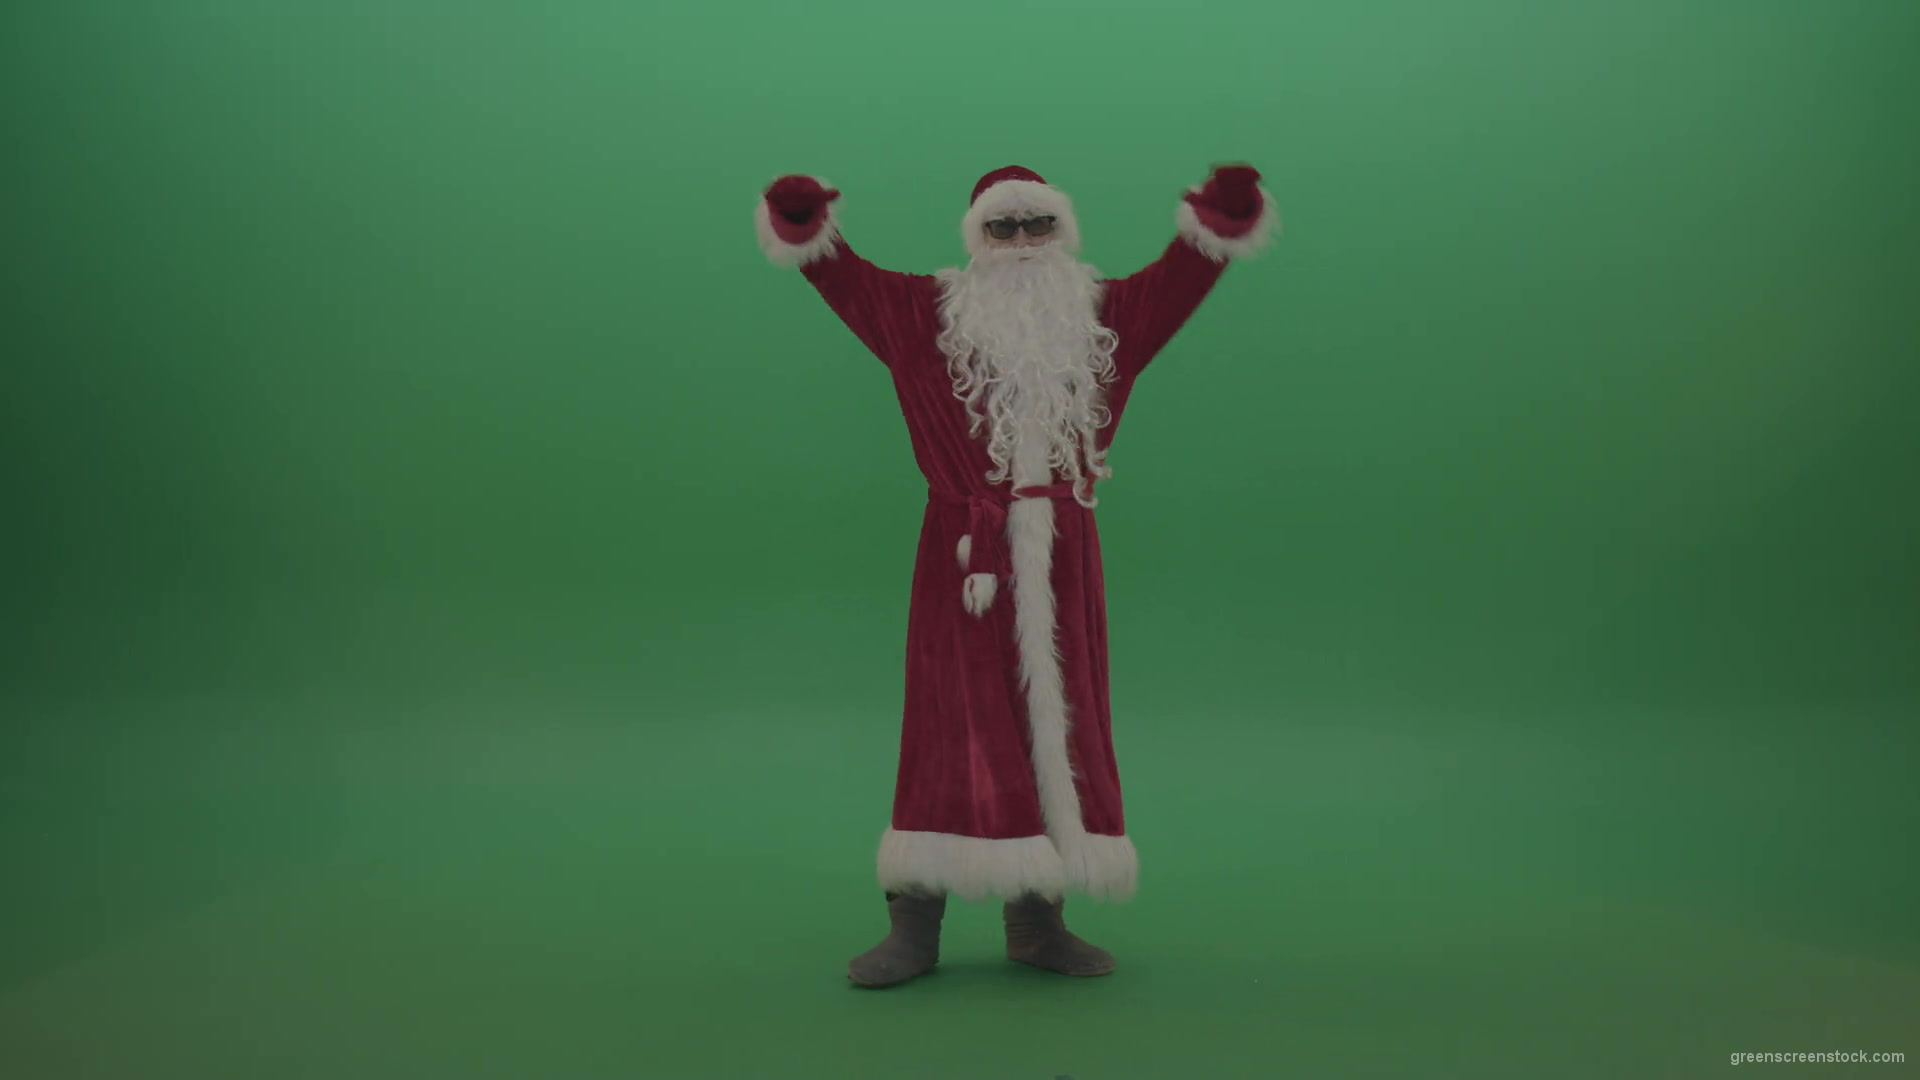 Santa-with-much-swagger-over-the-green-screen-background-1920_009 Green Screen Stock